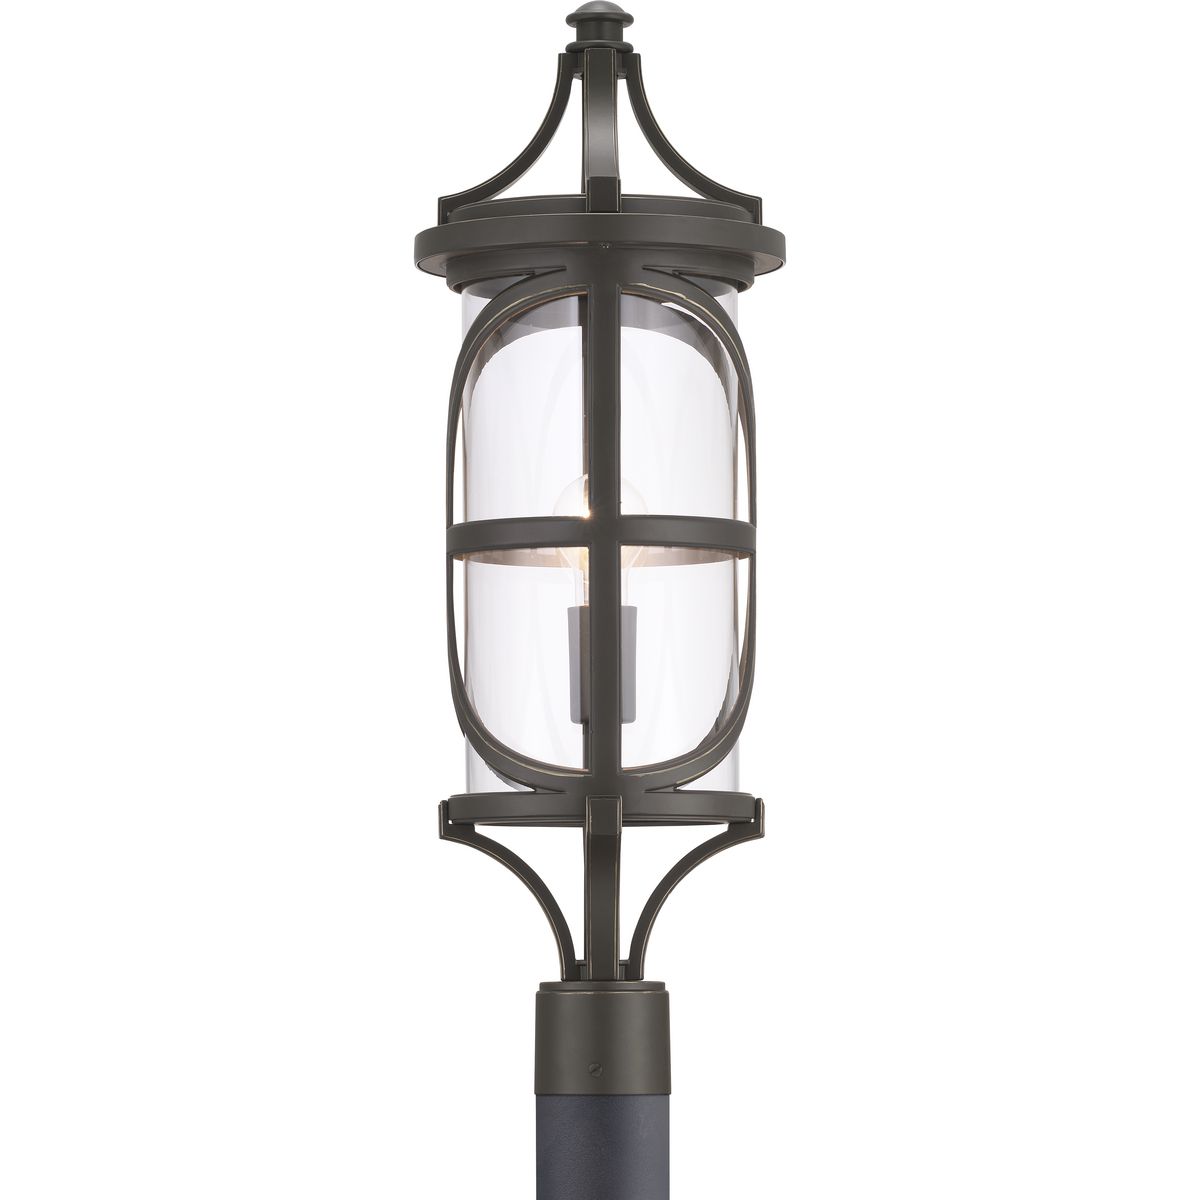 The Morrison Collection post lantern blends delicate geometric patterns with lasting durability in a modern form. Intricate die cast aluminum construction is paired with clear glass and an Antique Bronze finish.